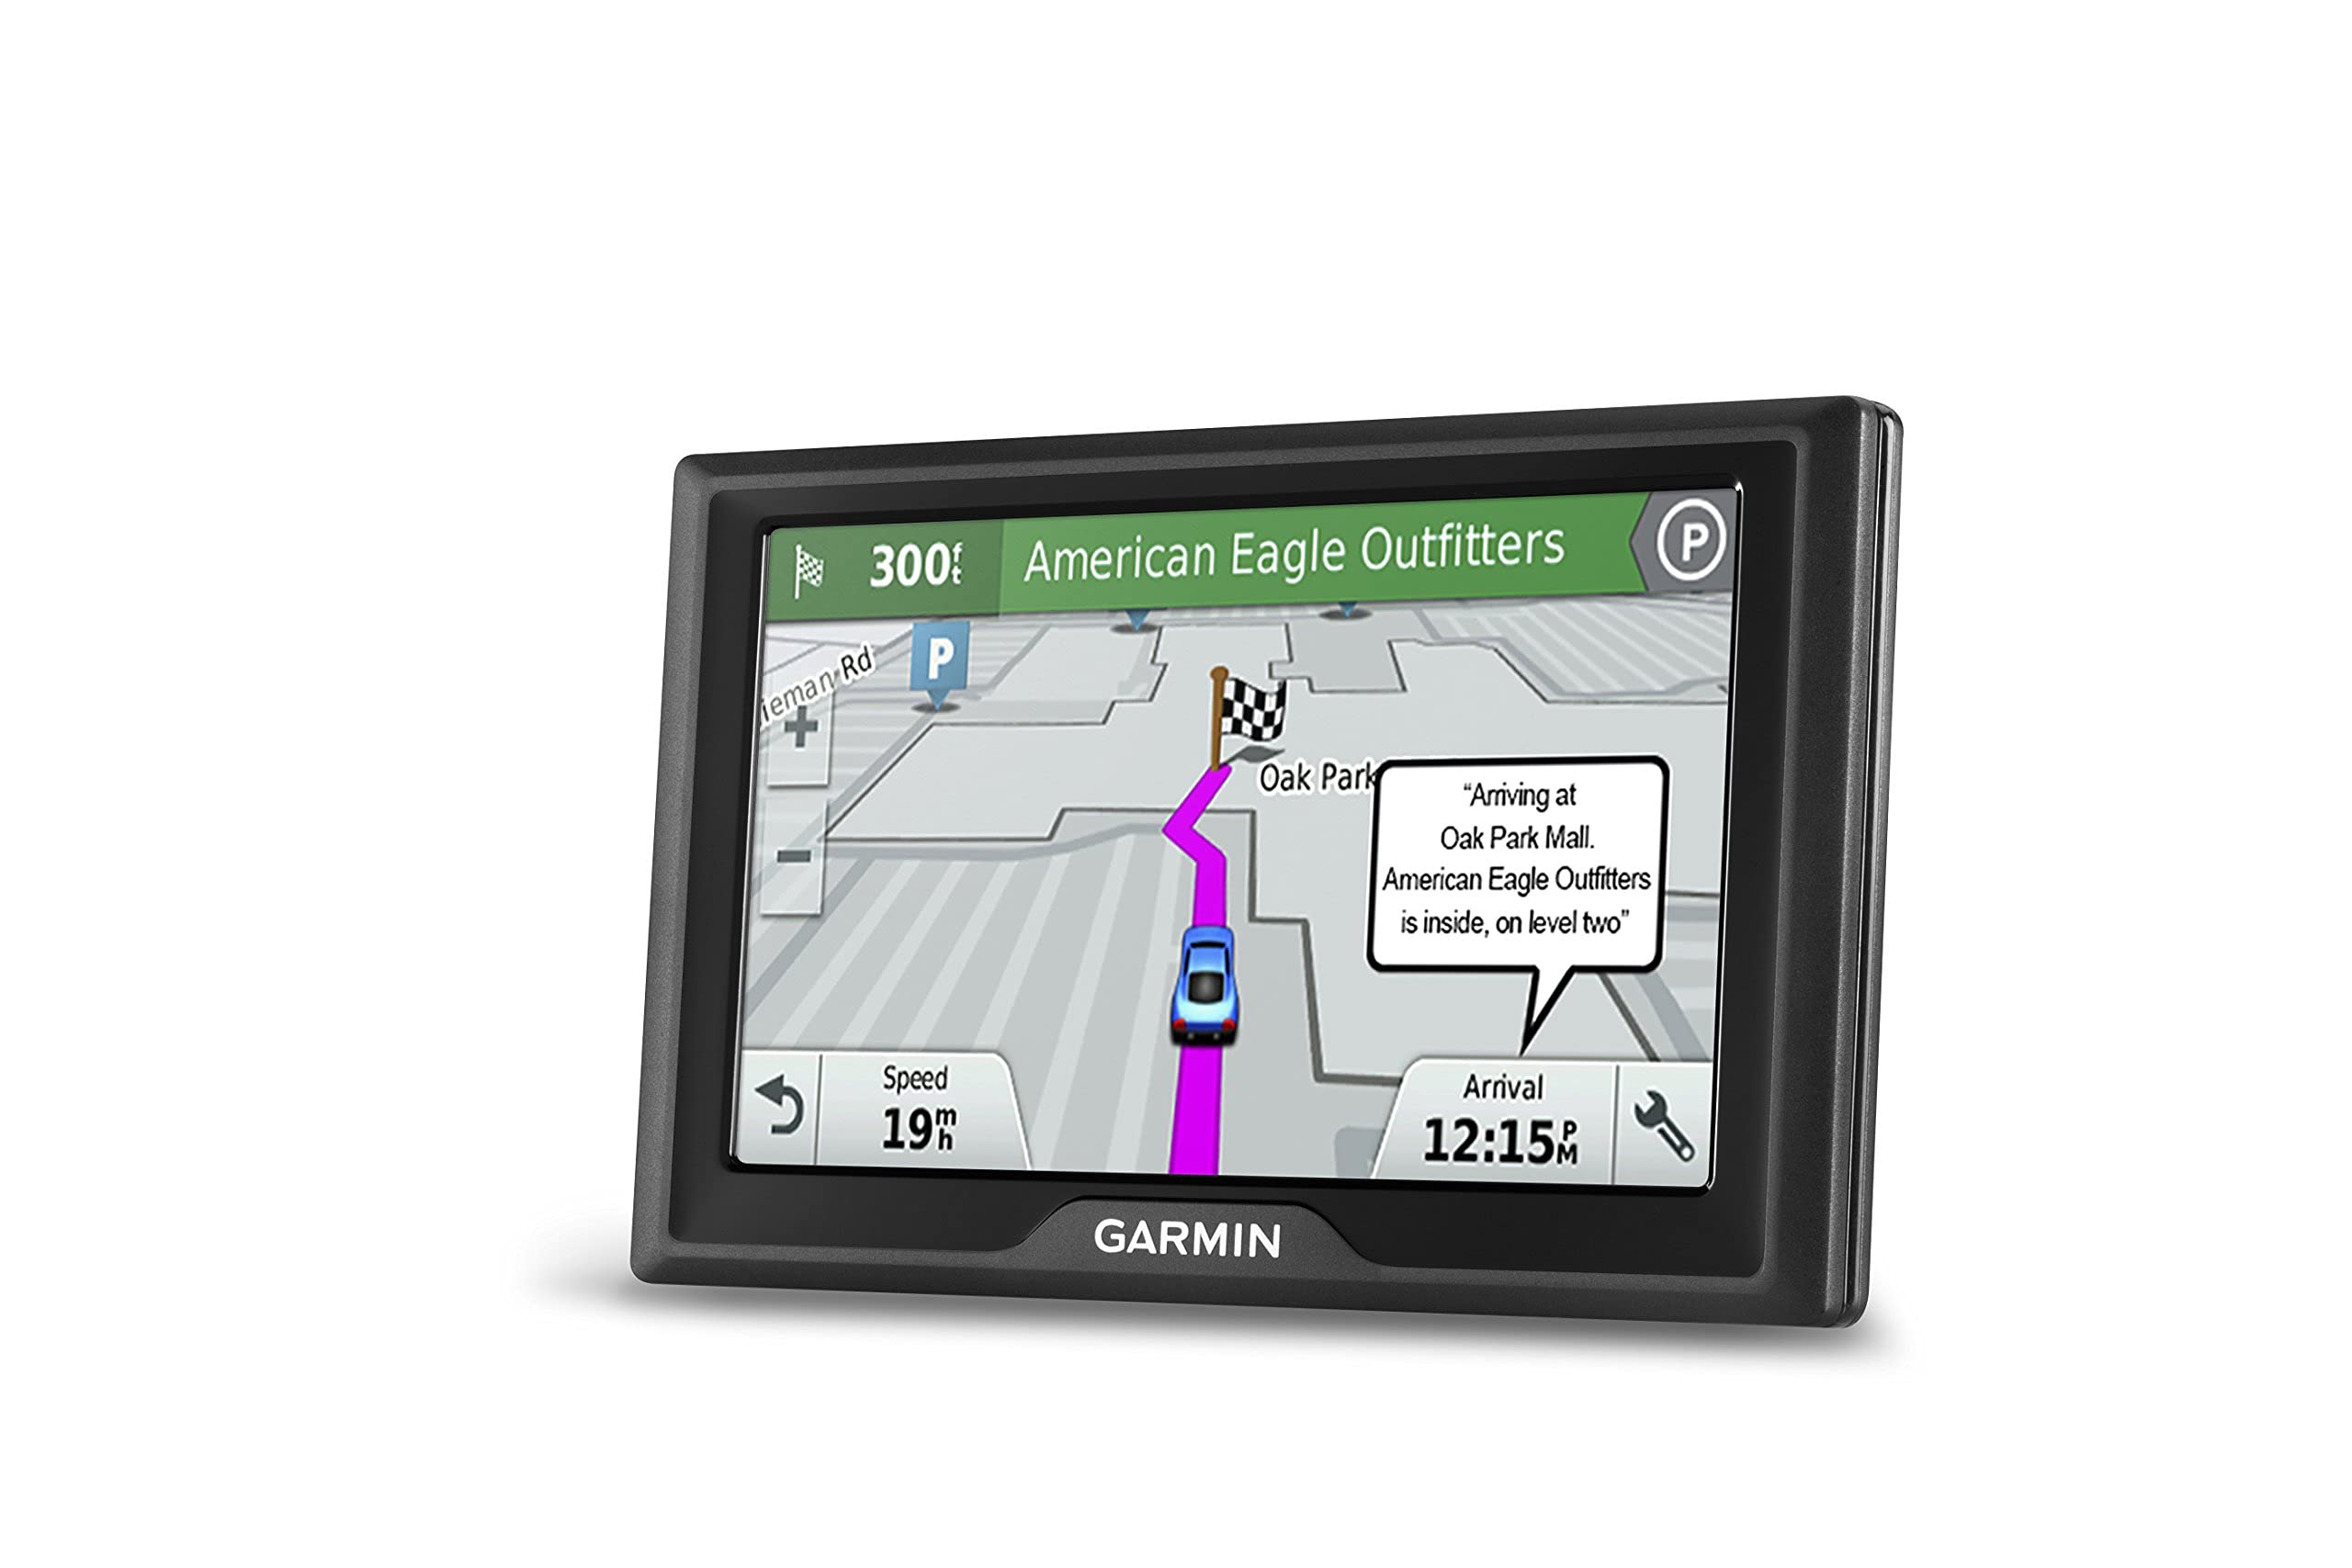 Garmin Drive 51 USA+CAN LMT-S GPS Navigator System with Lifetime Maps, Live Traffic and Live Parking, Driver Alerts, Direct Access, TripAdvisor and Foursquare data (Renewed)